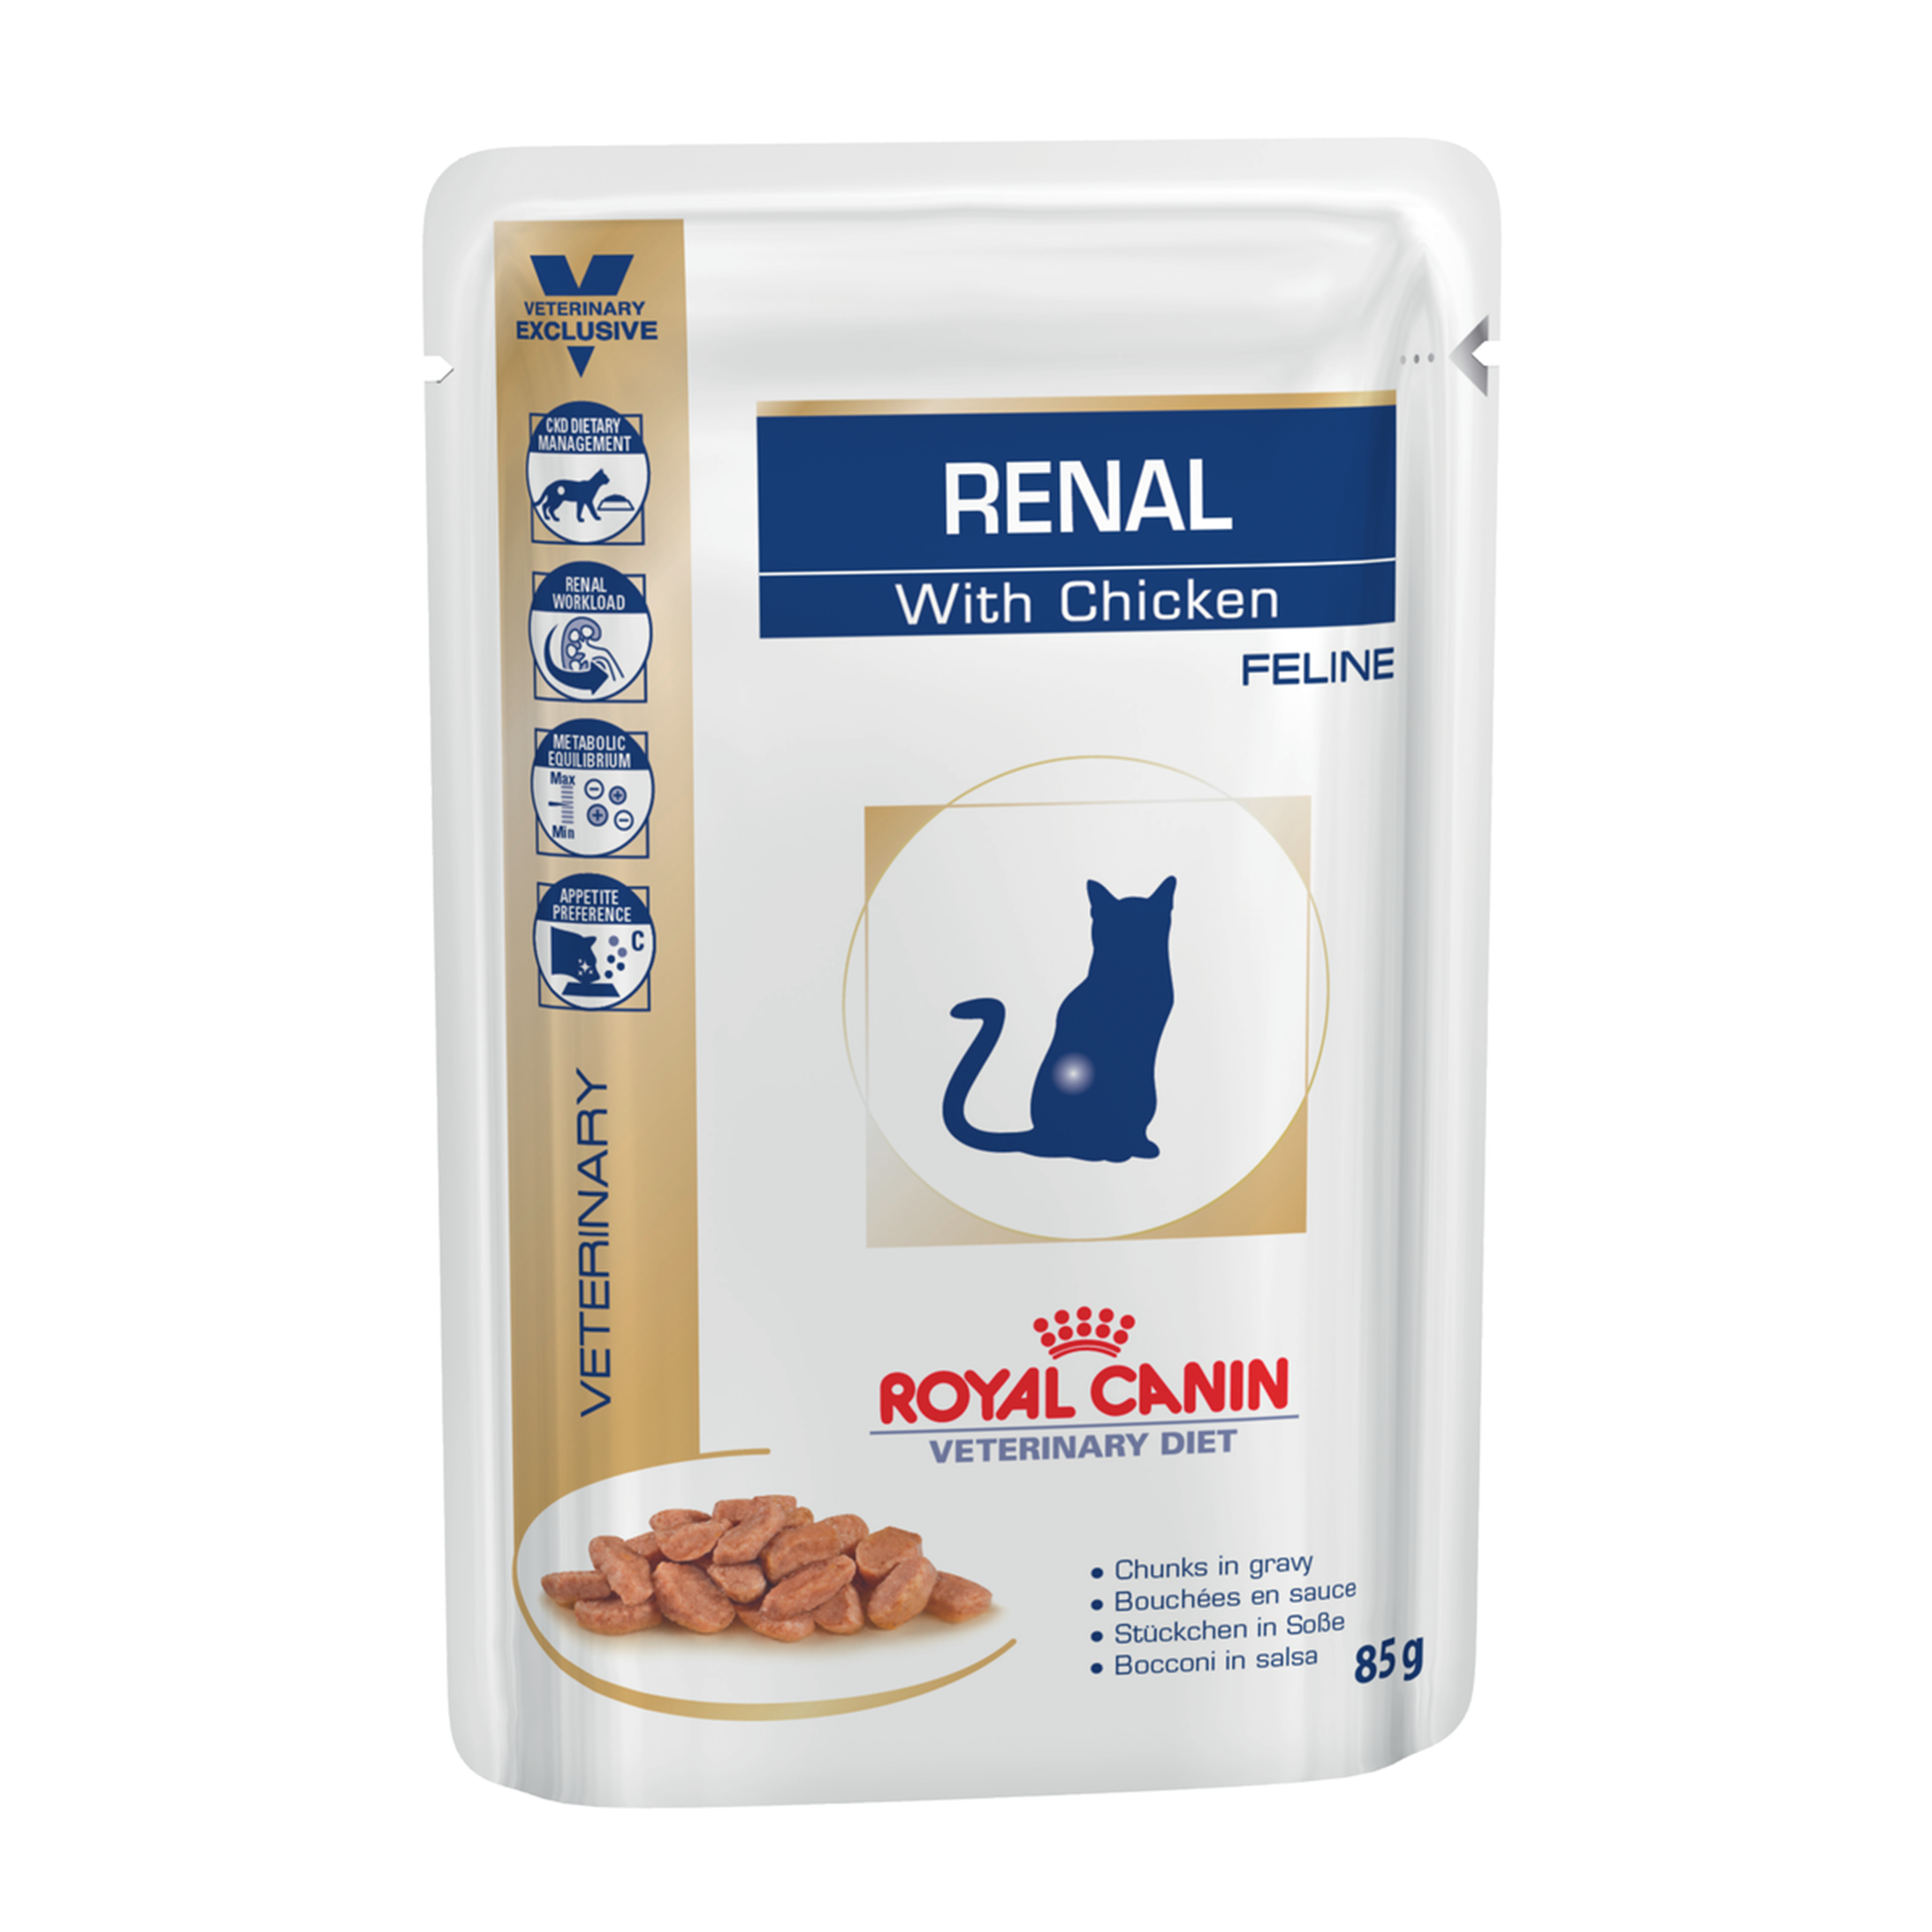 Royal Canin Feline Renal with chicken (85 gm\pouch) - Wet food for Renal and chronic kidney diseases – 12 pouches per box price for one pouch